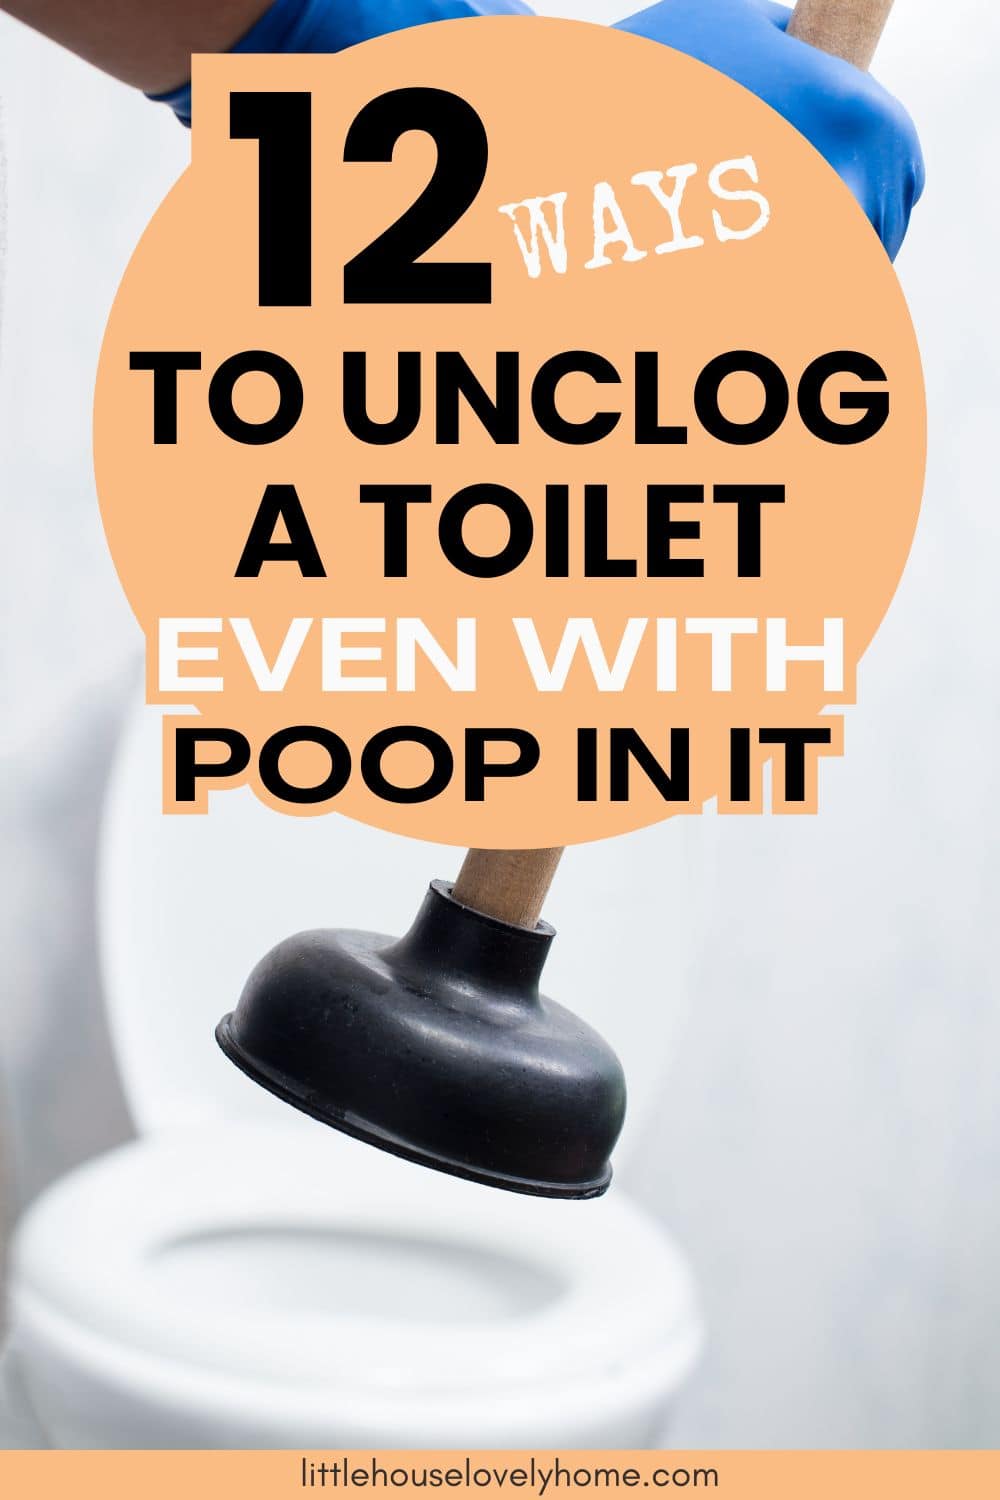  A toilet bowl with a plunger_Ways to Unclog a Toilet